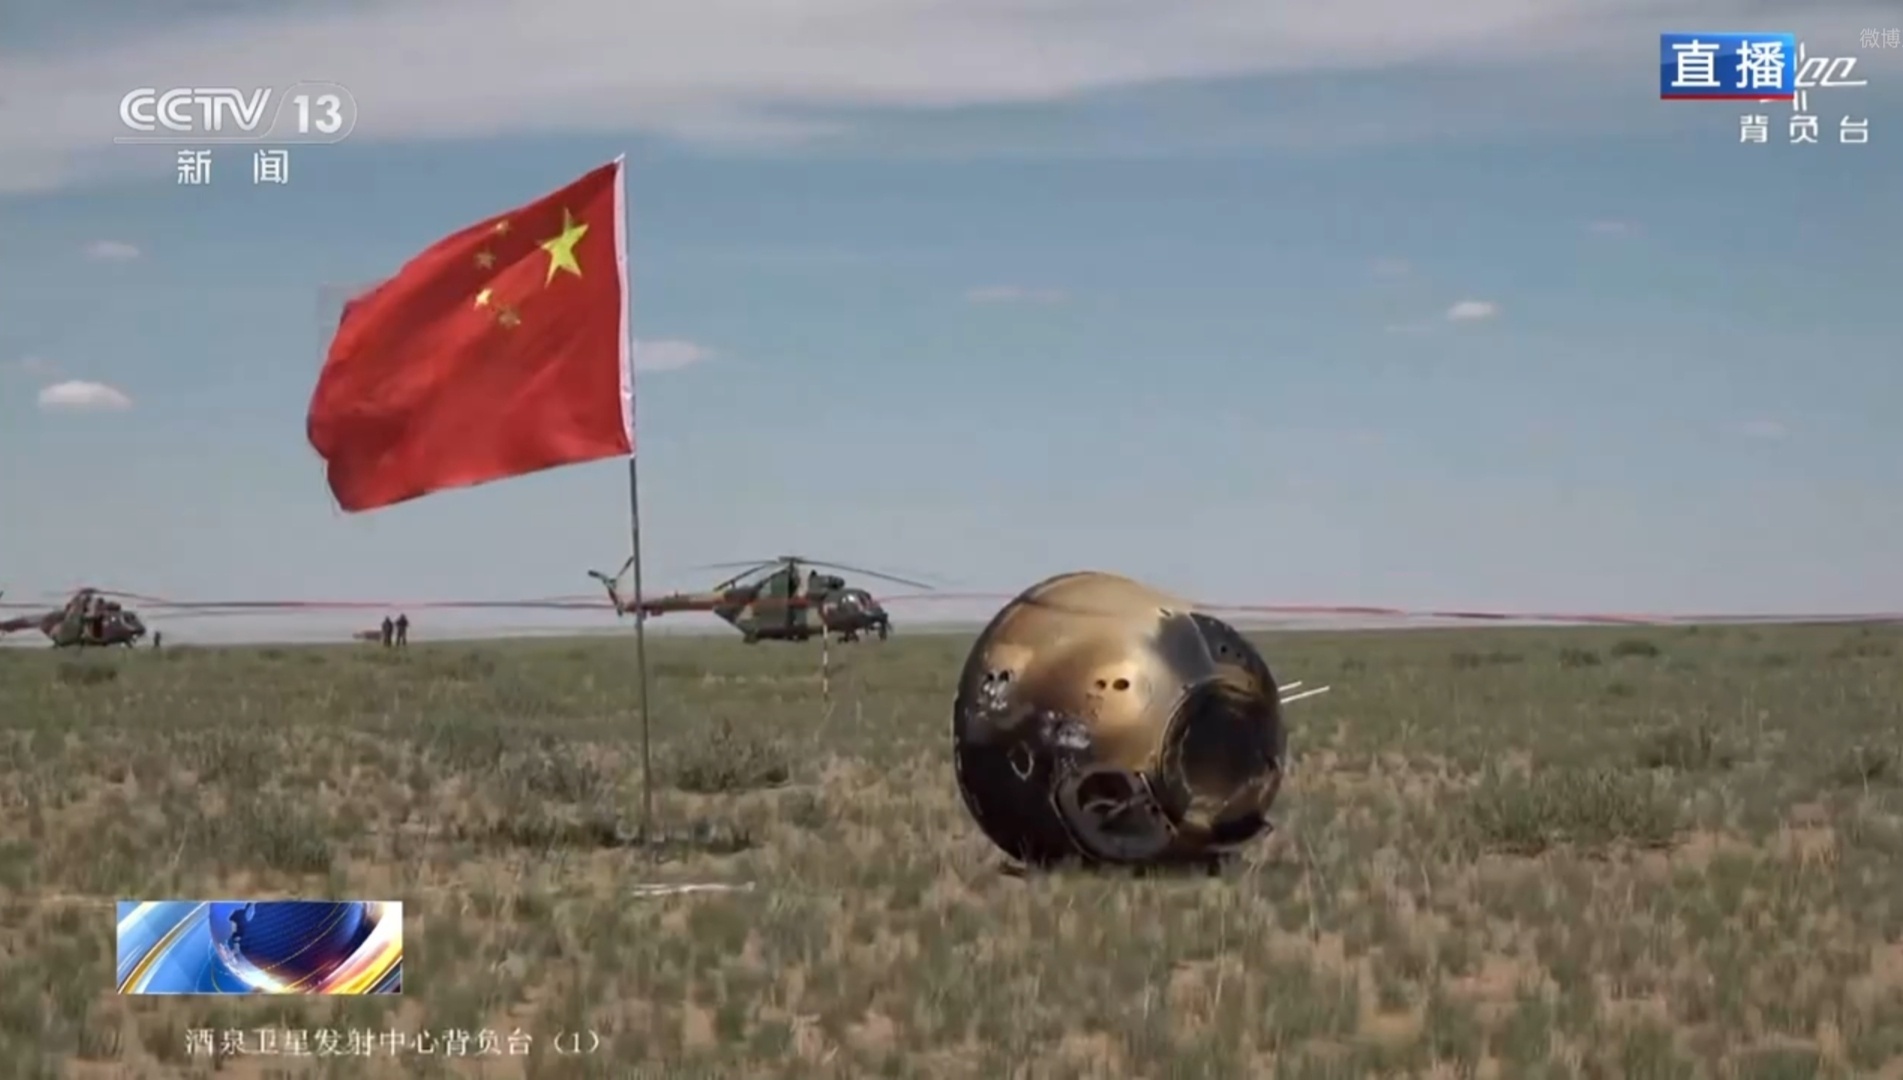 Chang'e-6 sample return capsule and Chinese flag